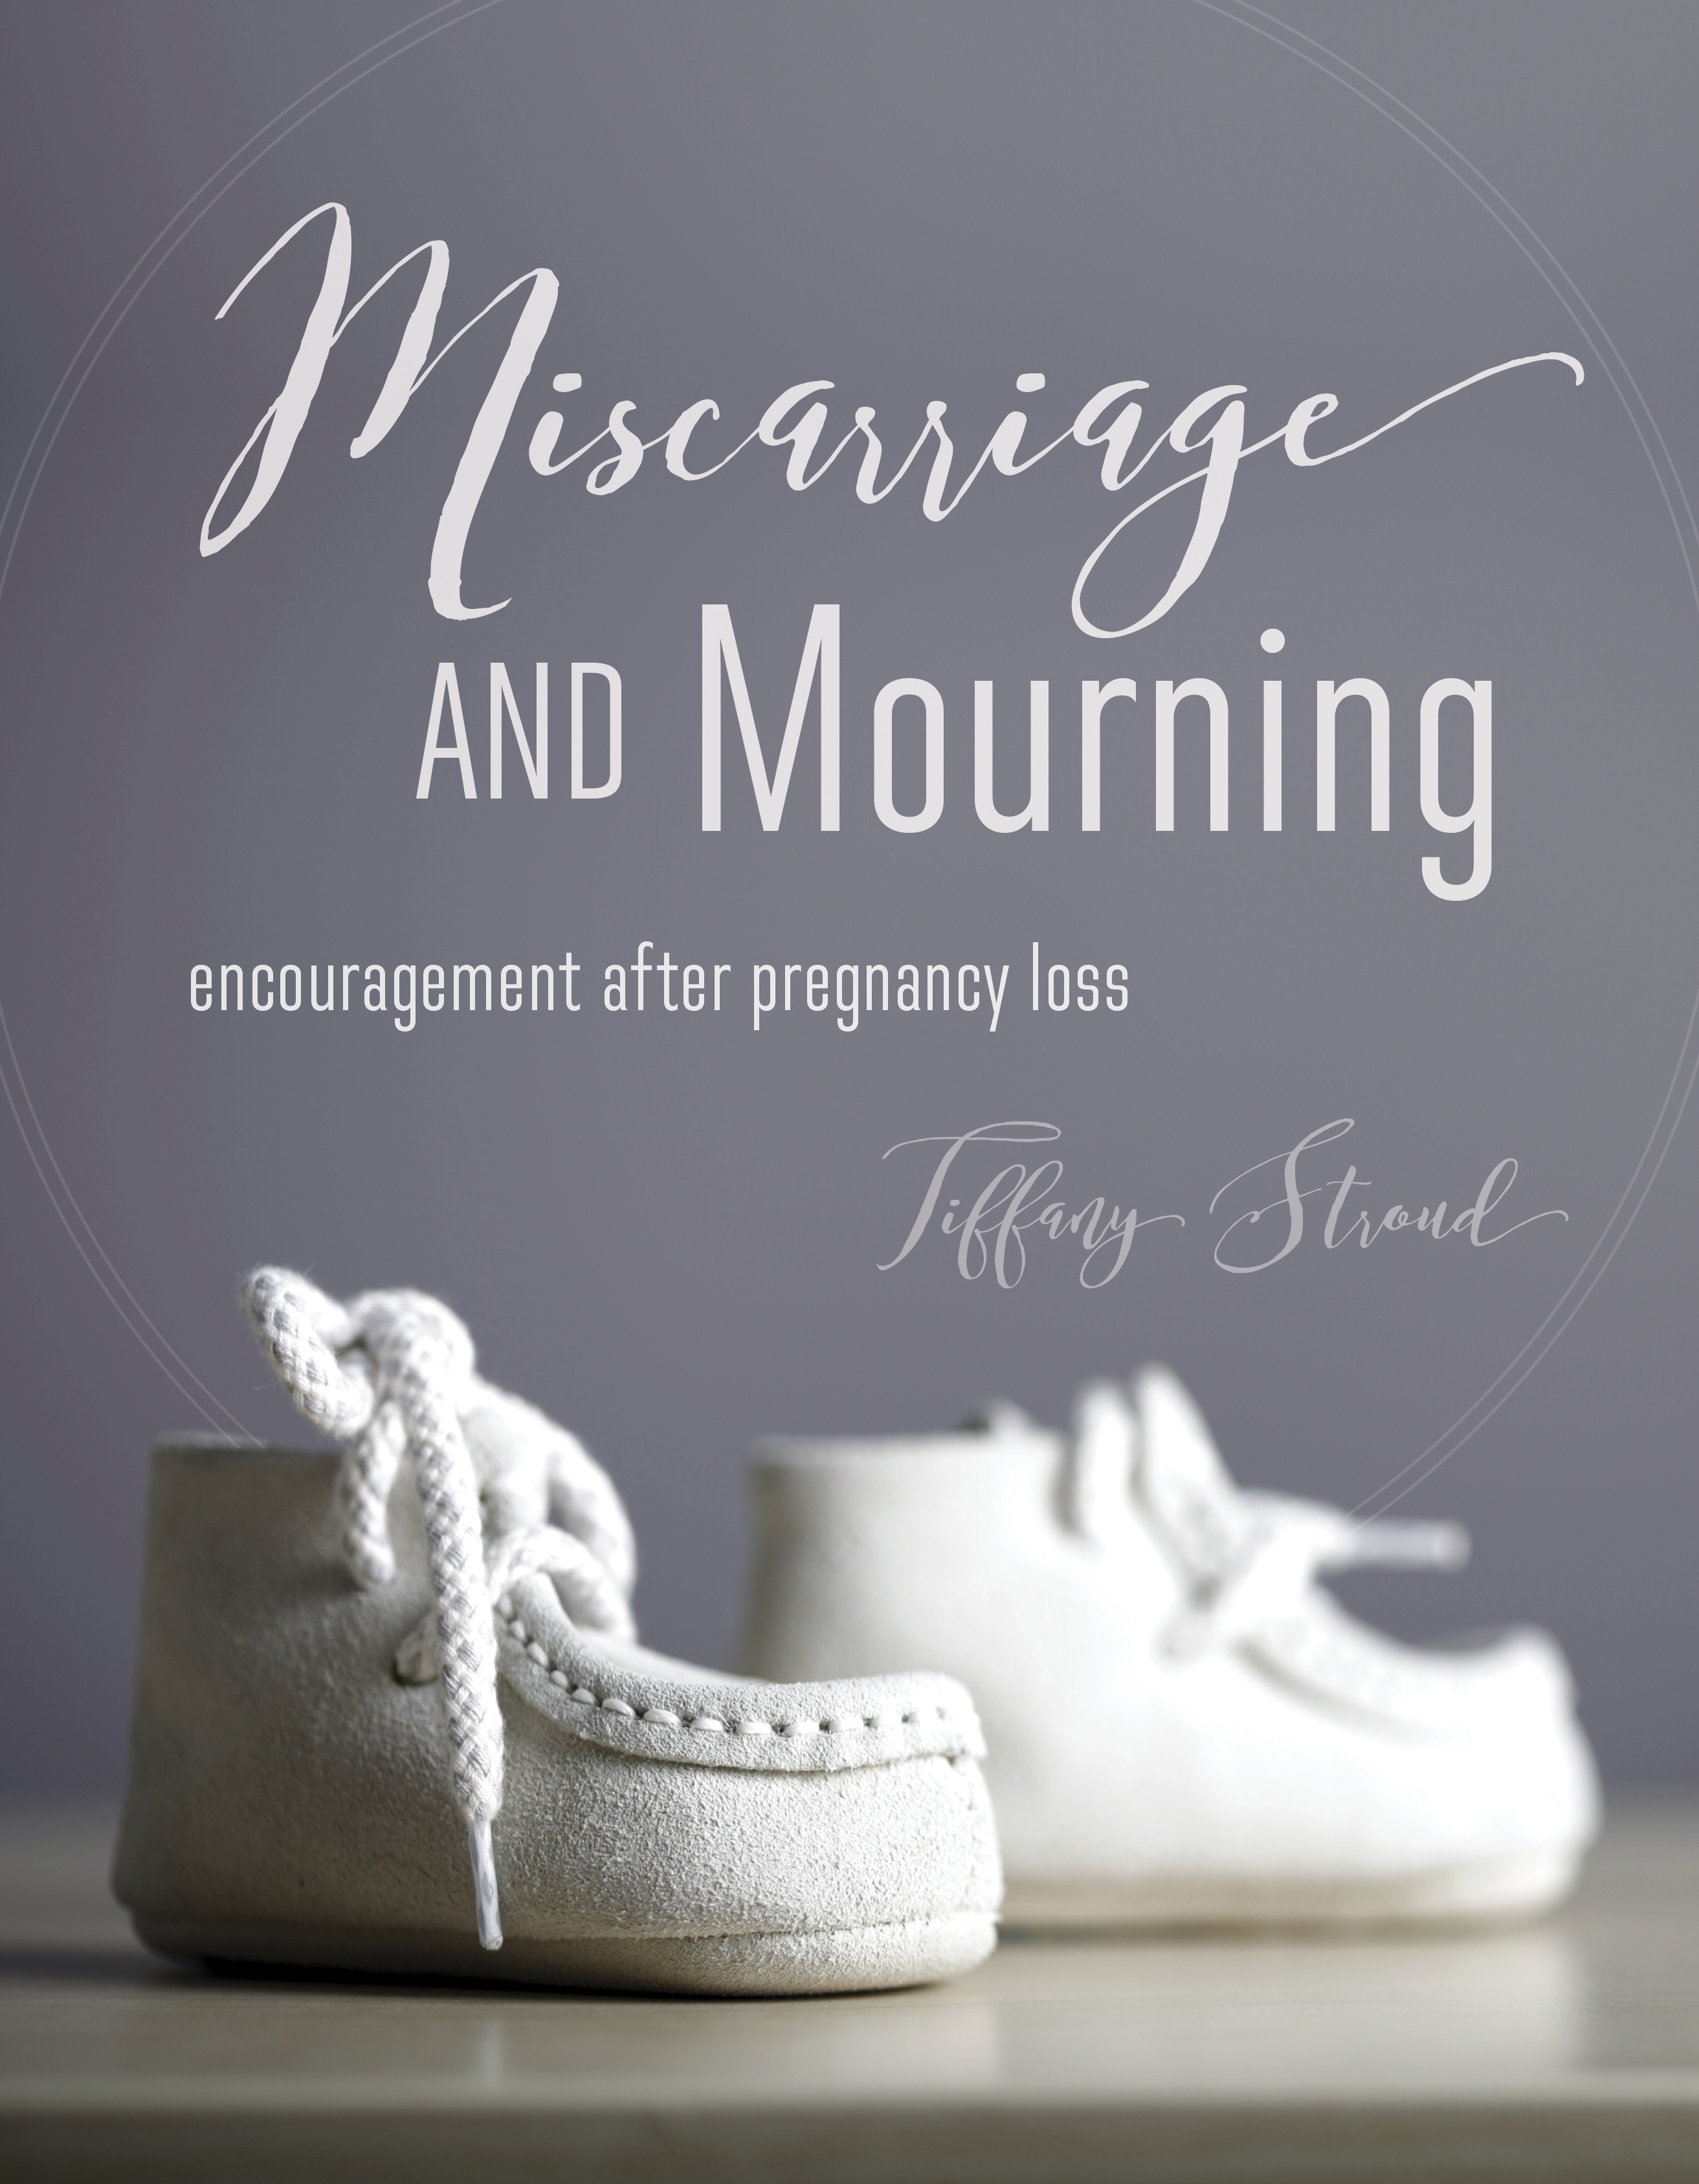 You can now pre-order the eBook Miscarriage & Mourning on Amazon.